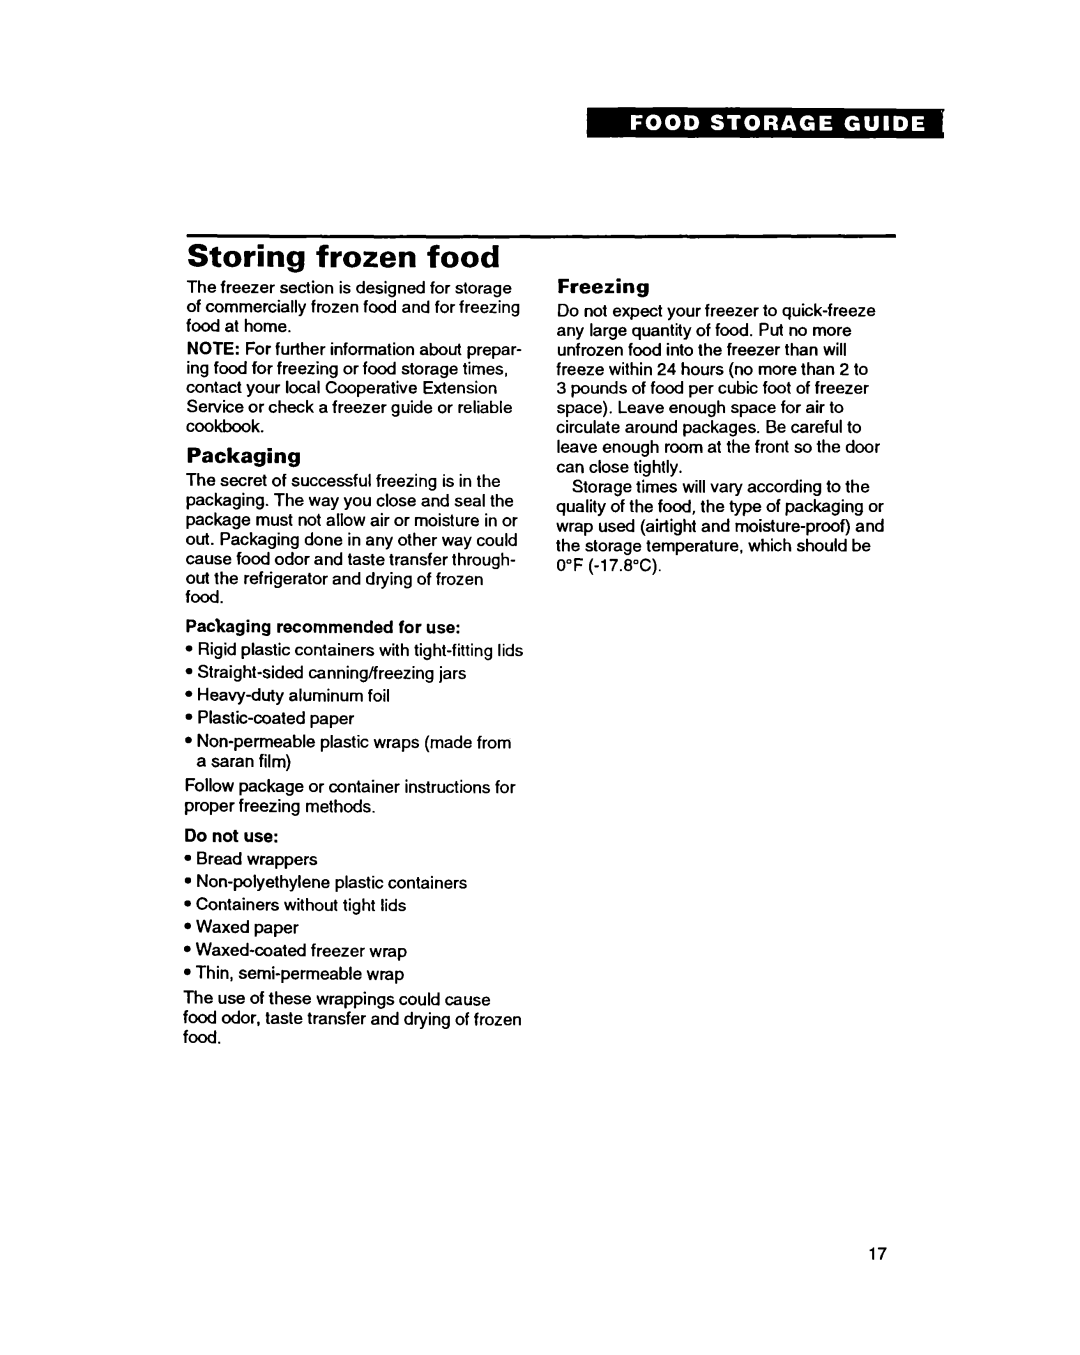 Whirlpool RT14EK, RT14GD, RT14HD important safety instructions Storing frozen food, Packaging, Freezing 